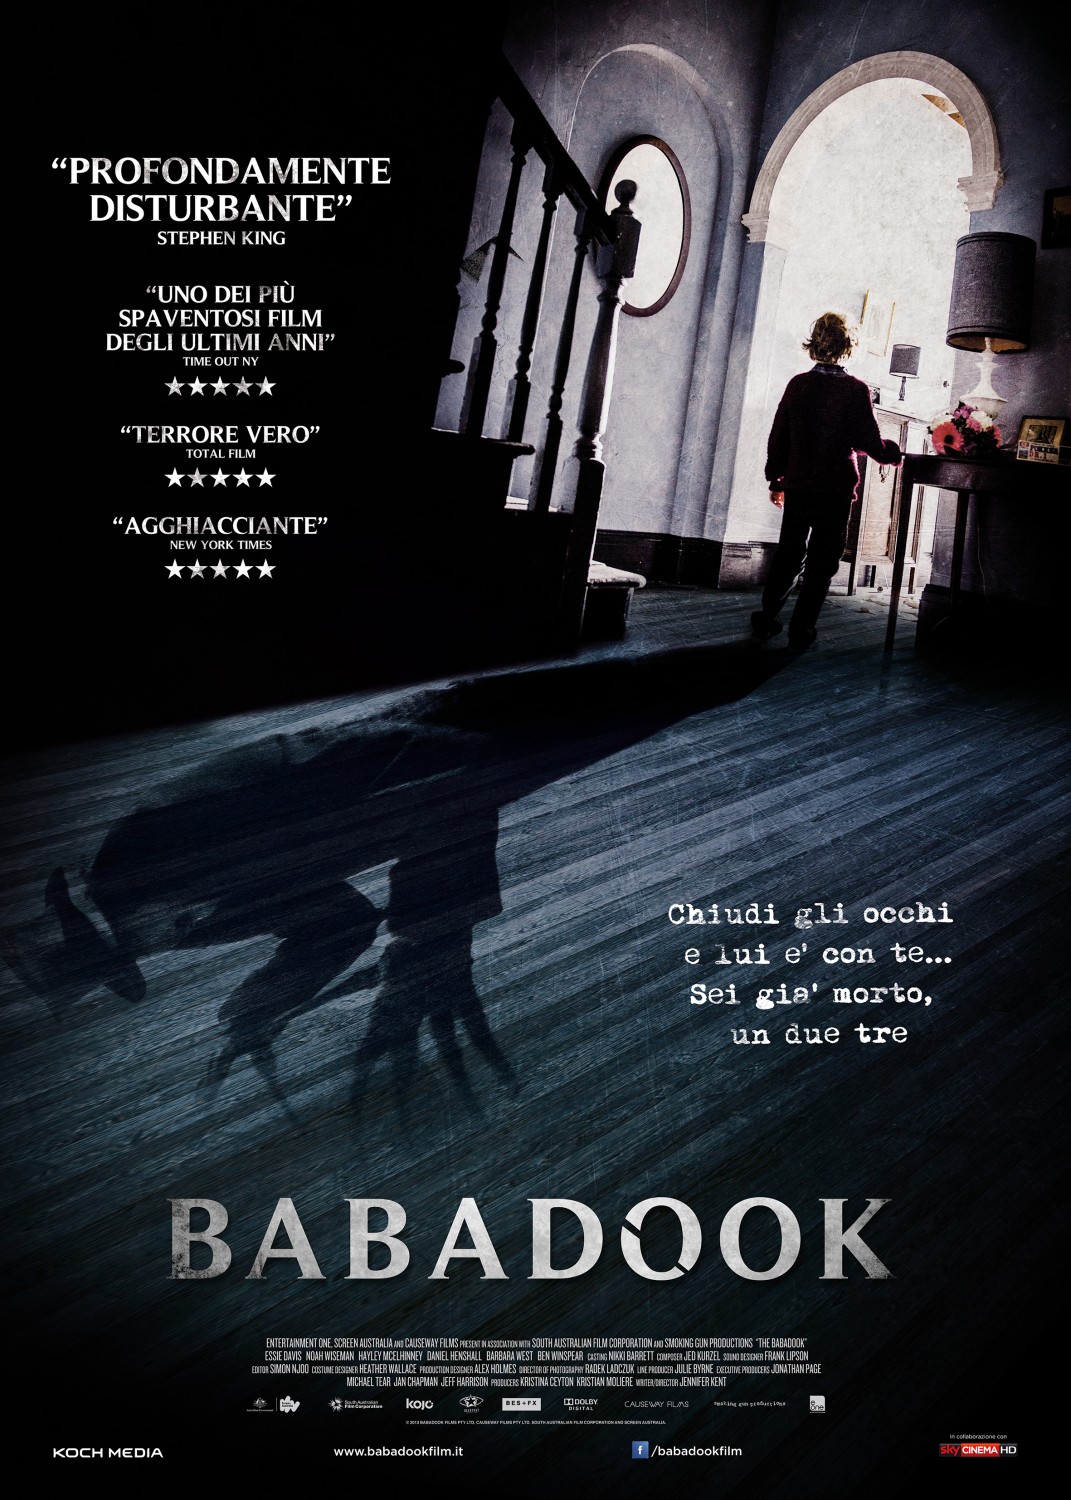 Extra Large Movie Poster Image for The Babadook (#7 of 7)